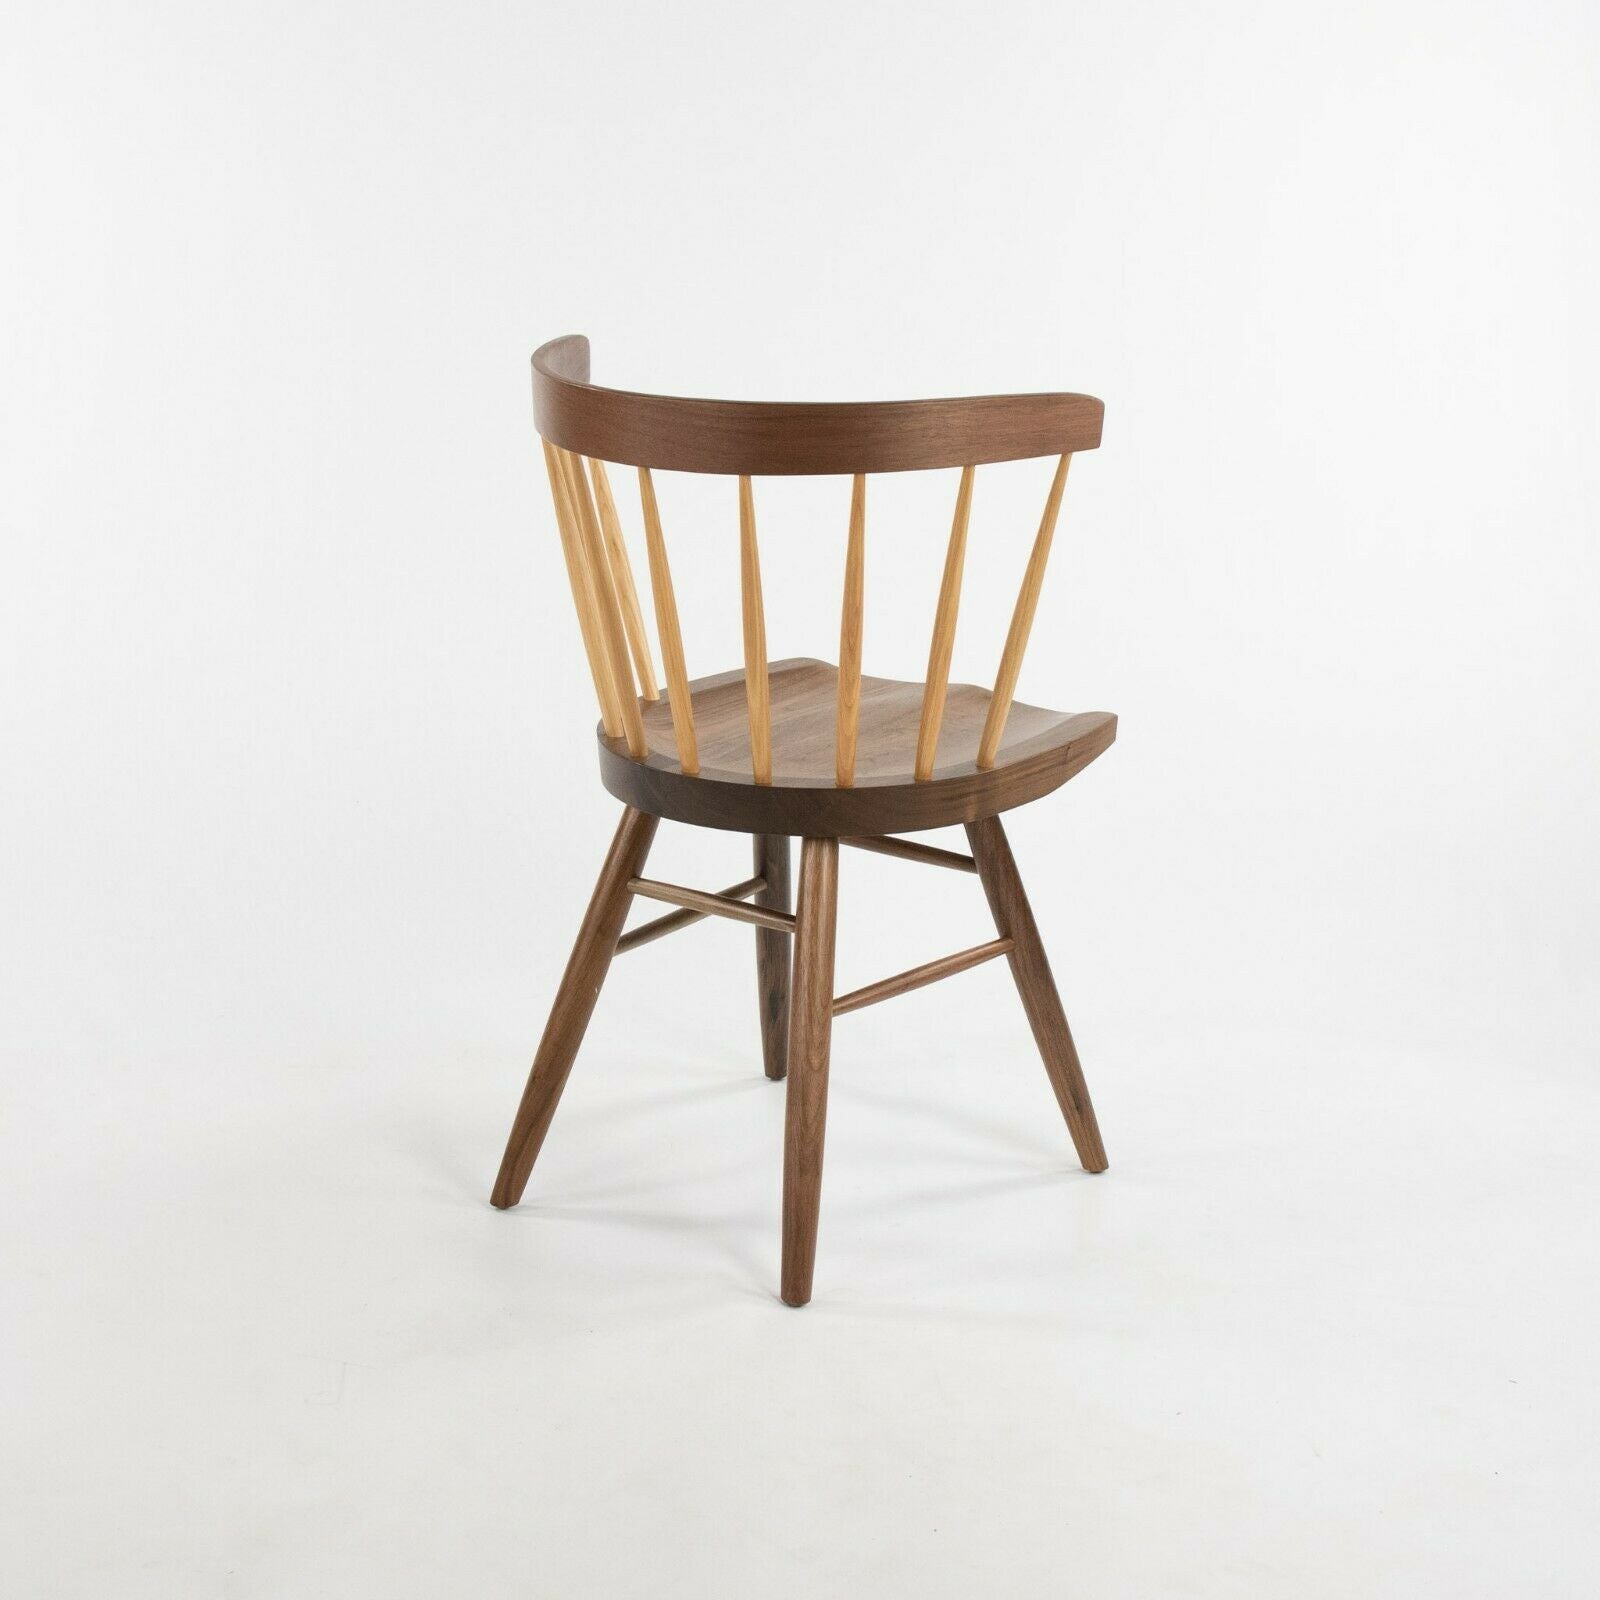 SOLD 2021 George Nakashima for Knoll Straight Dining Chair Walnut w/ Hickory Spindles